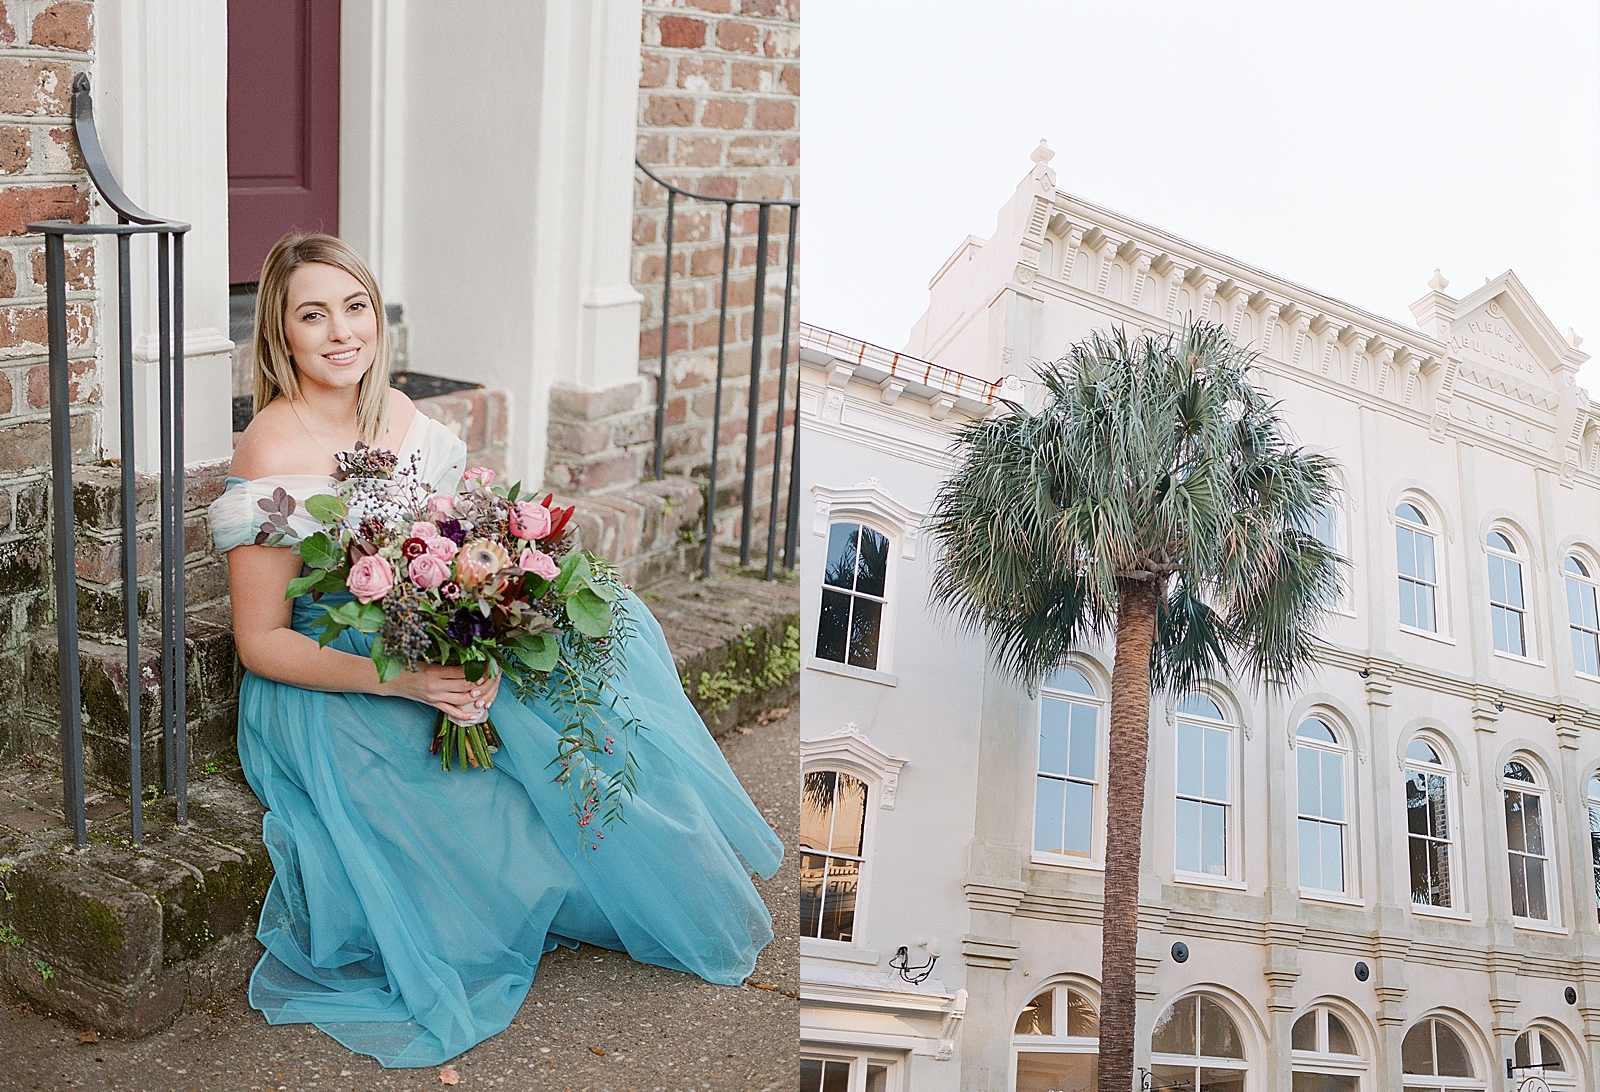 Jamie Sitting on Stairs in Vintage Blue Dress and Downtown Charleston Building Photos